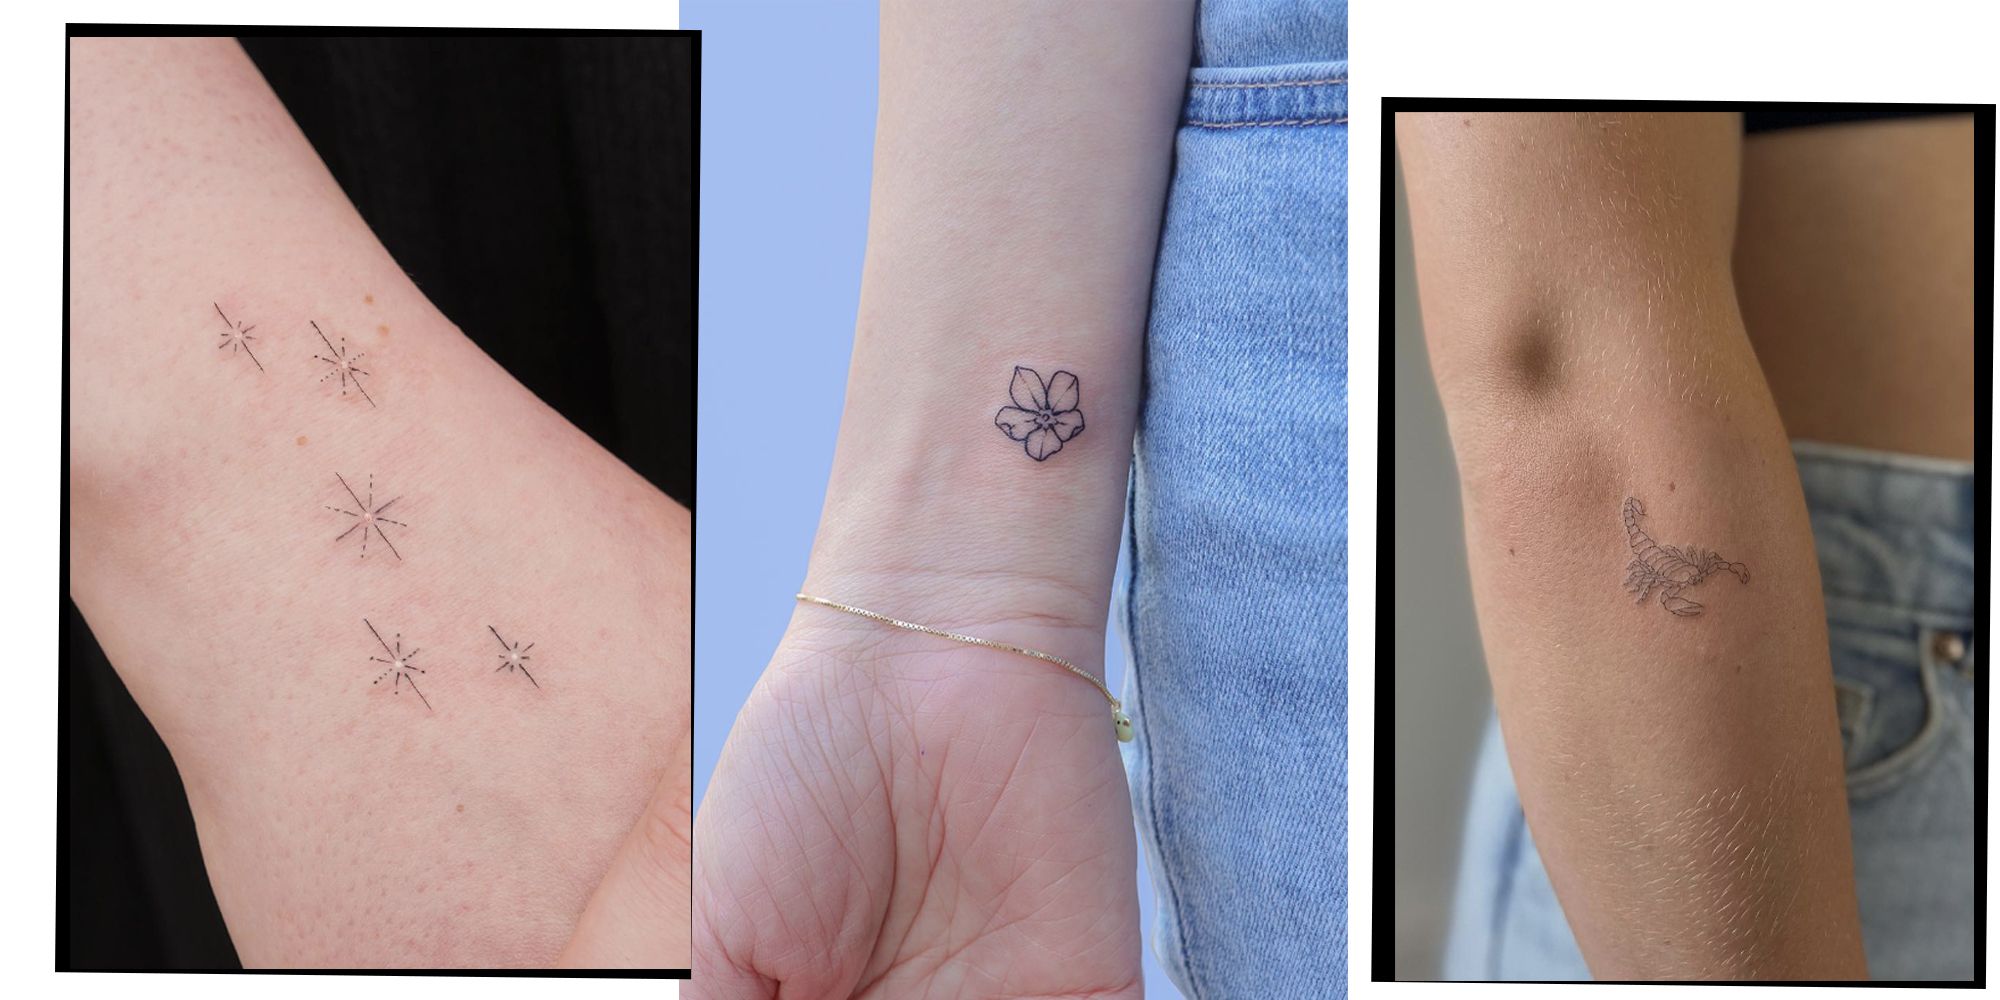 13 Strawberry Tattoo Ideas That Are Irresistibly Cute